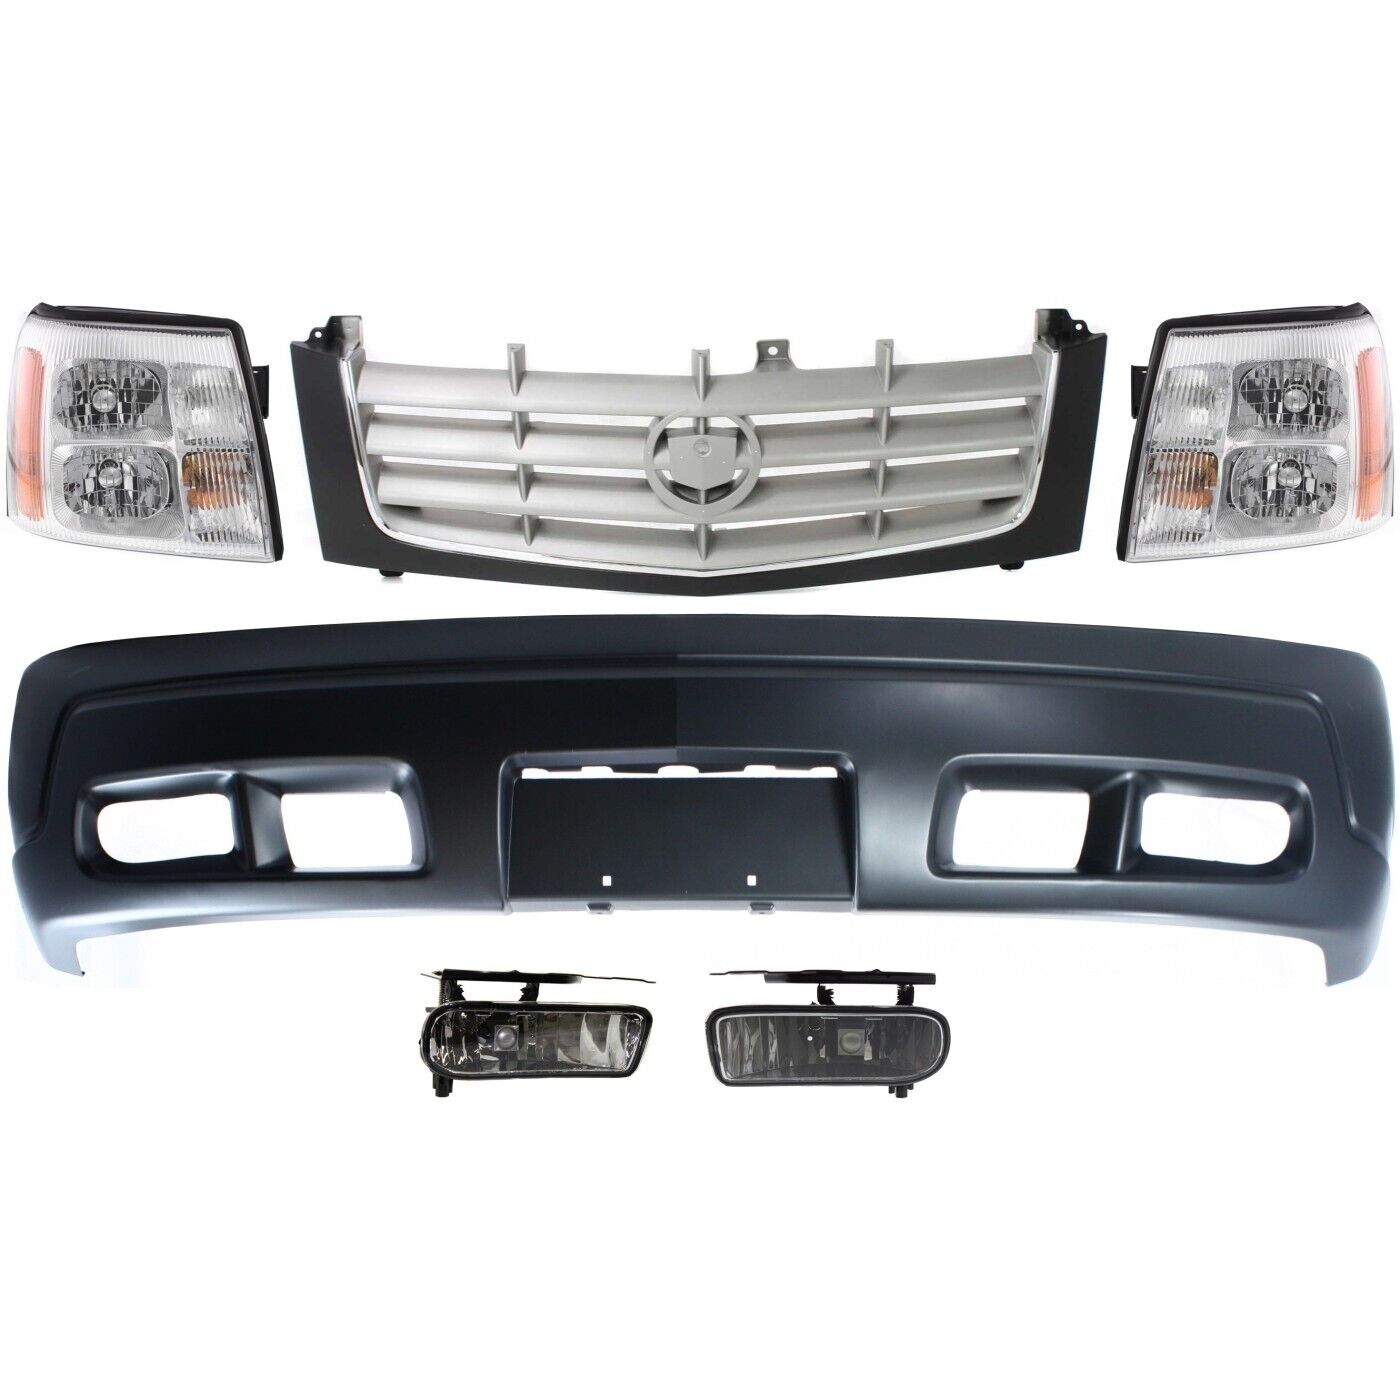 Bumper Cover Fog Light Kit For 2002-2002 Cadillac Escalade Front